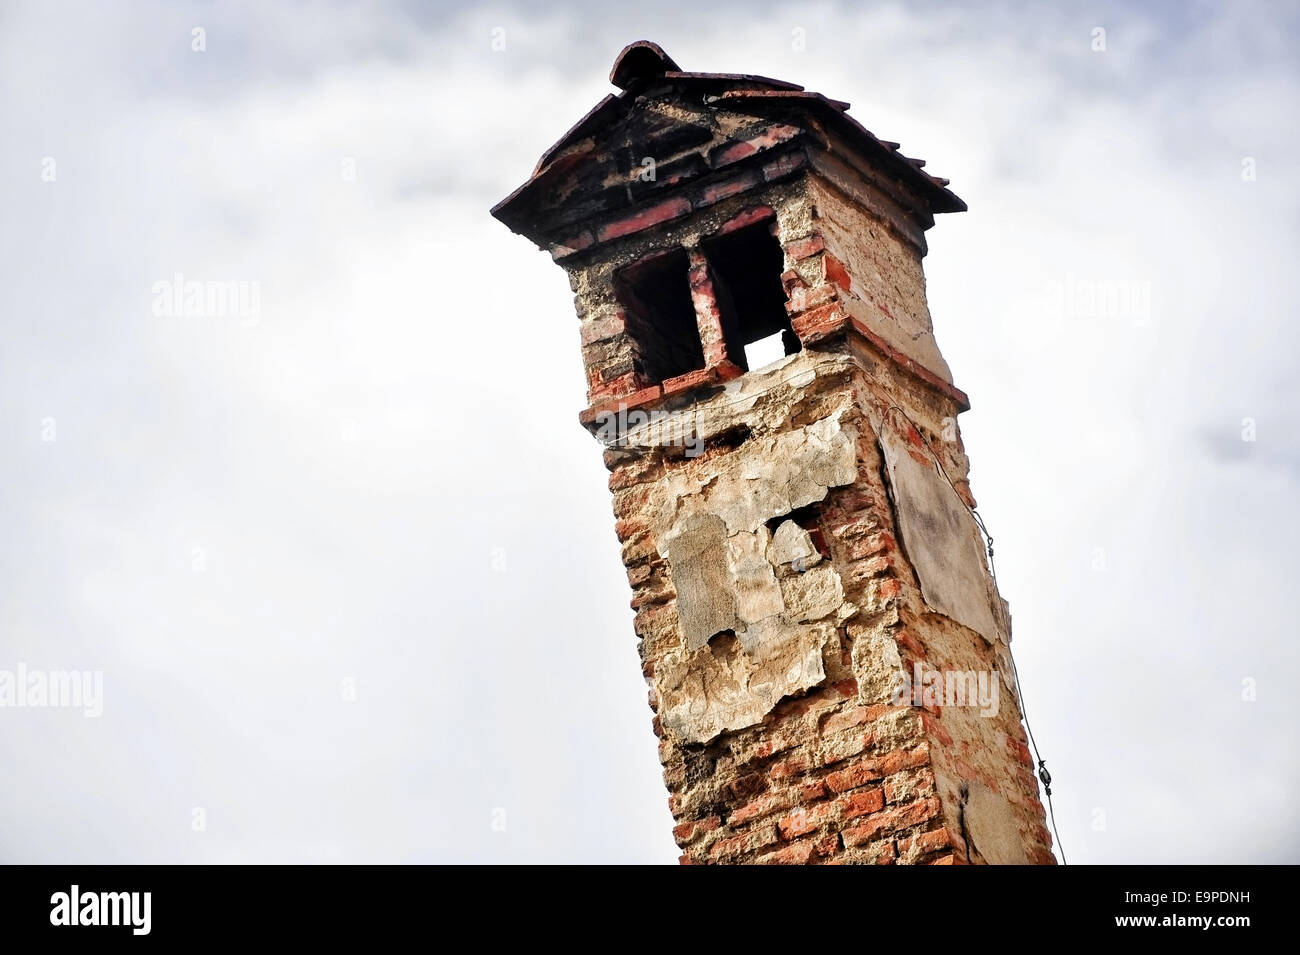 Architecture detail with very old brick smoking chimney Stock Photo